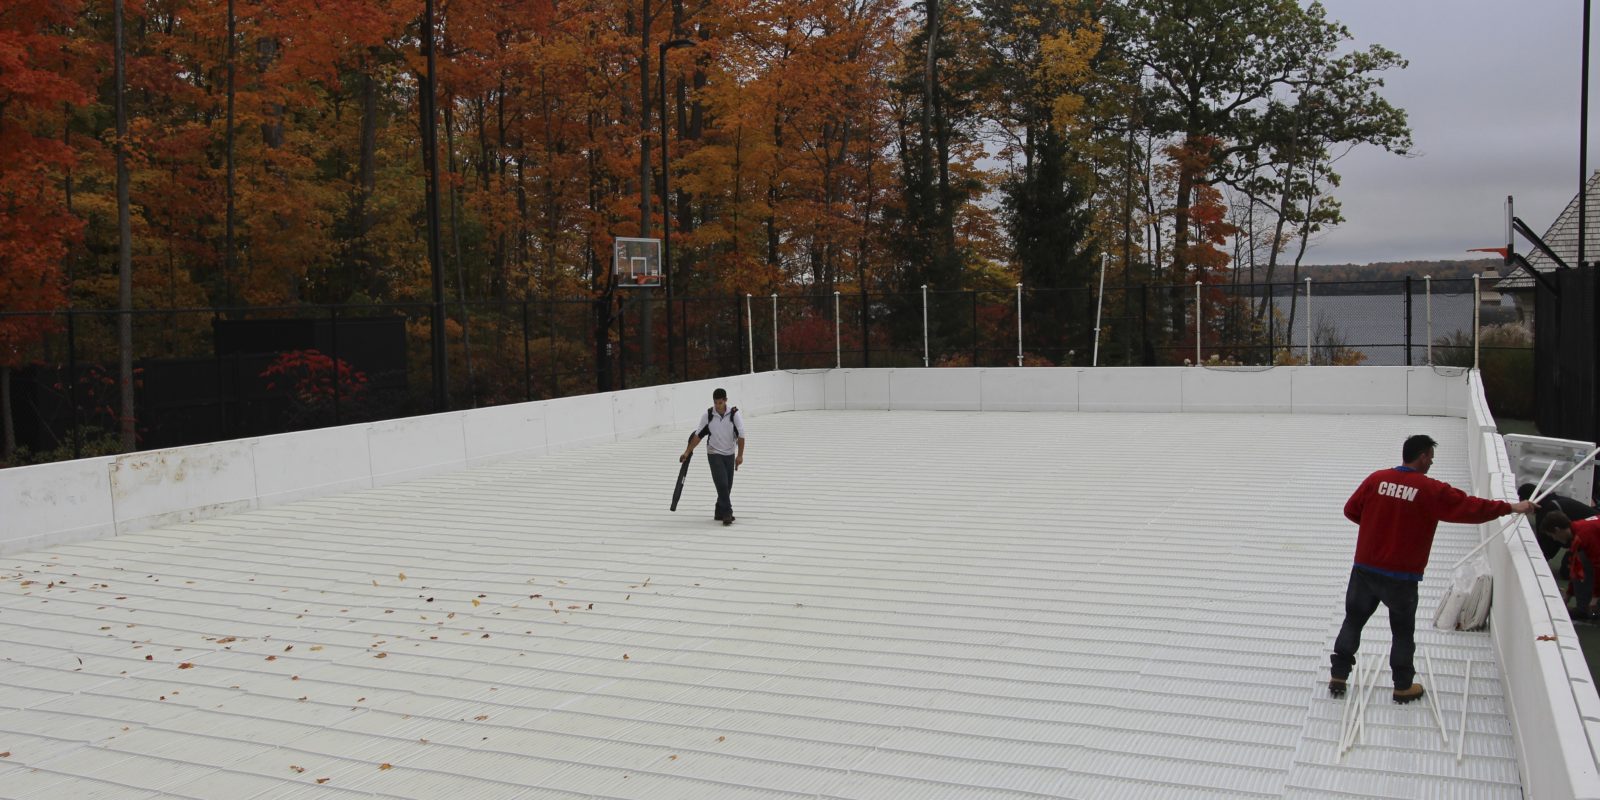 Portable refrigerated ice rink on tennis court